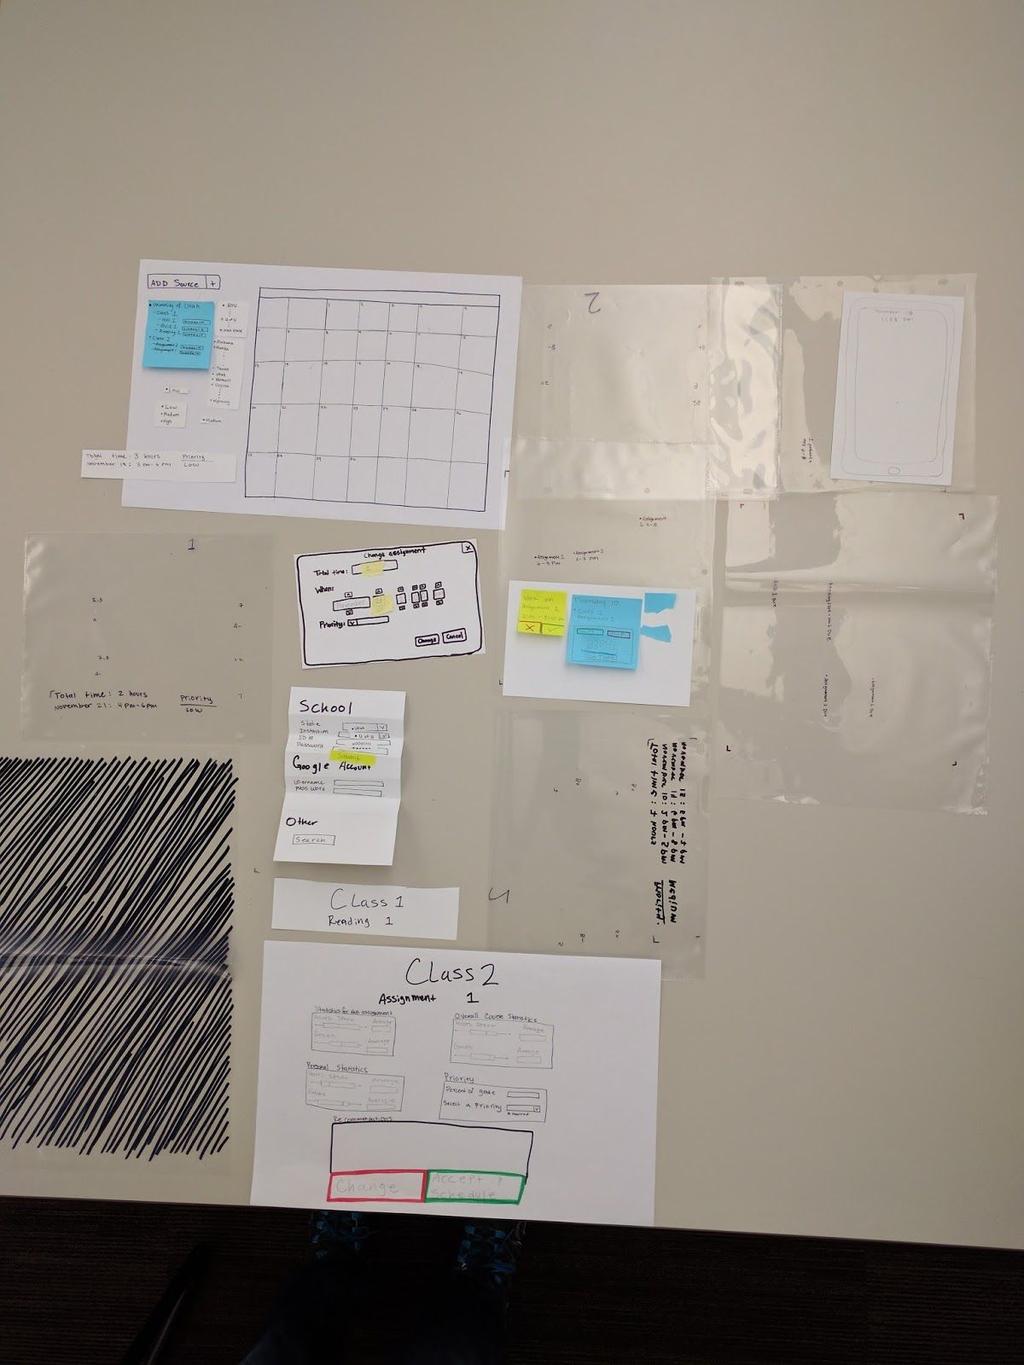 Initial Paper Prototype The paper prototype is designed primarily as a desktop web